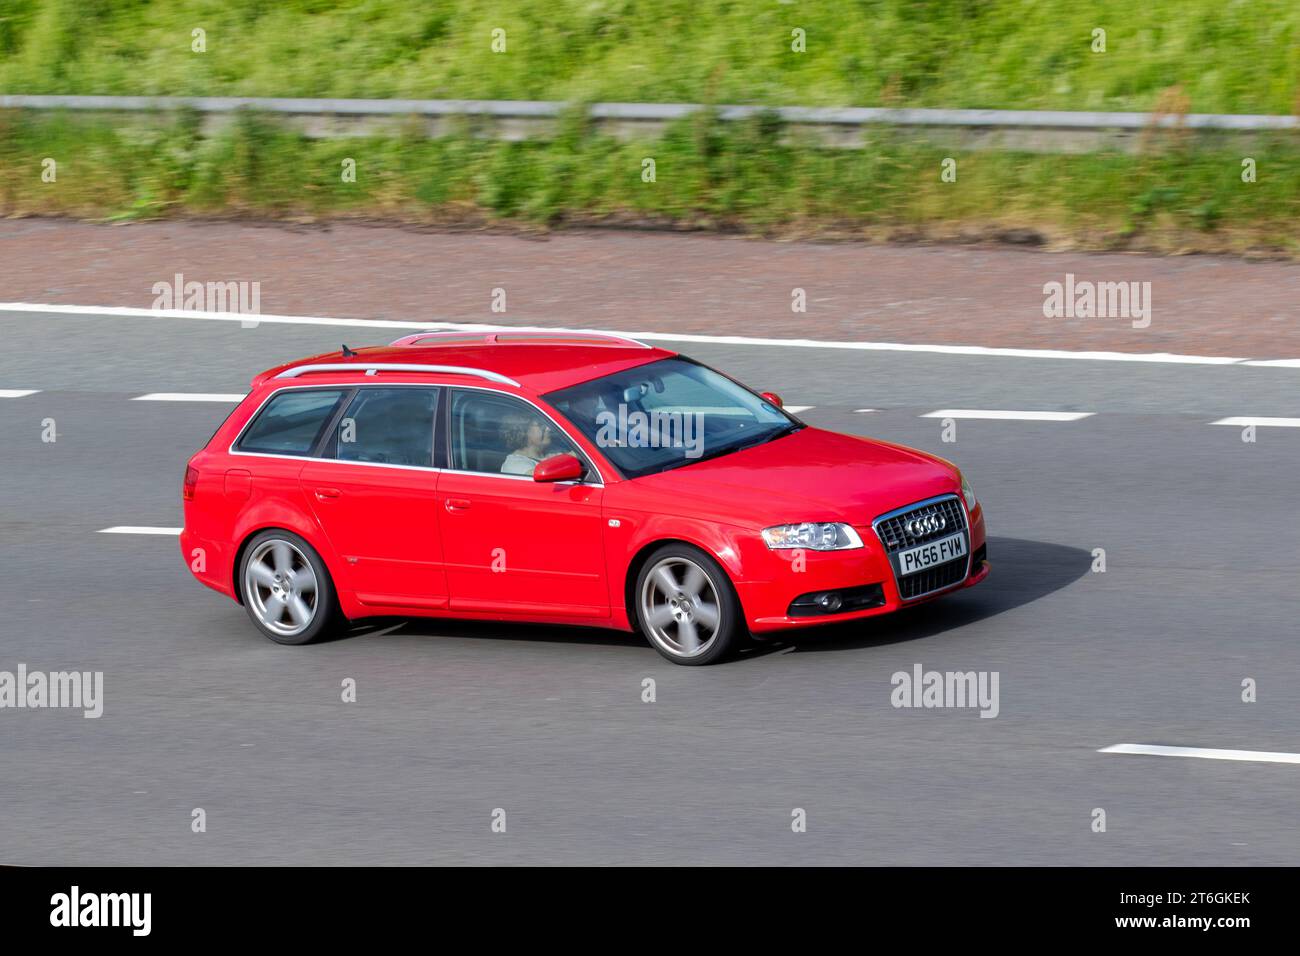 2006 Audi A4 Avant S Line Tdi 140 Tdi TDV 140 Red Car Estate Diesel 1986 cc; travelling at speed on the M6 motorway in Greater Manchester, UK Stock Photo